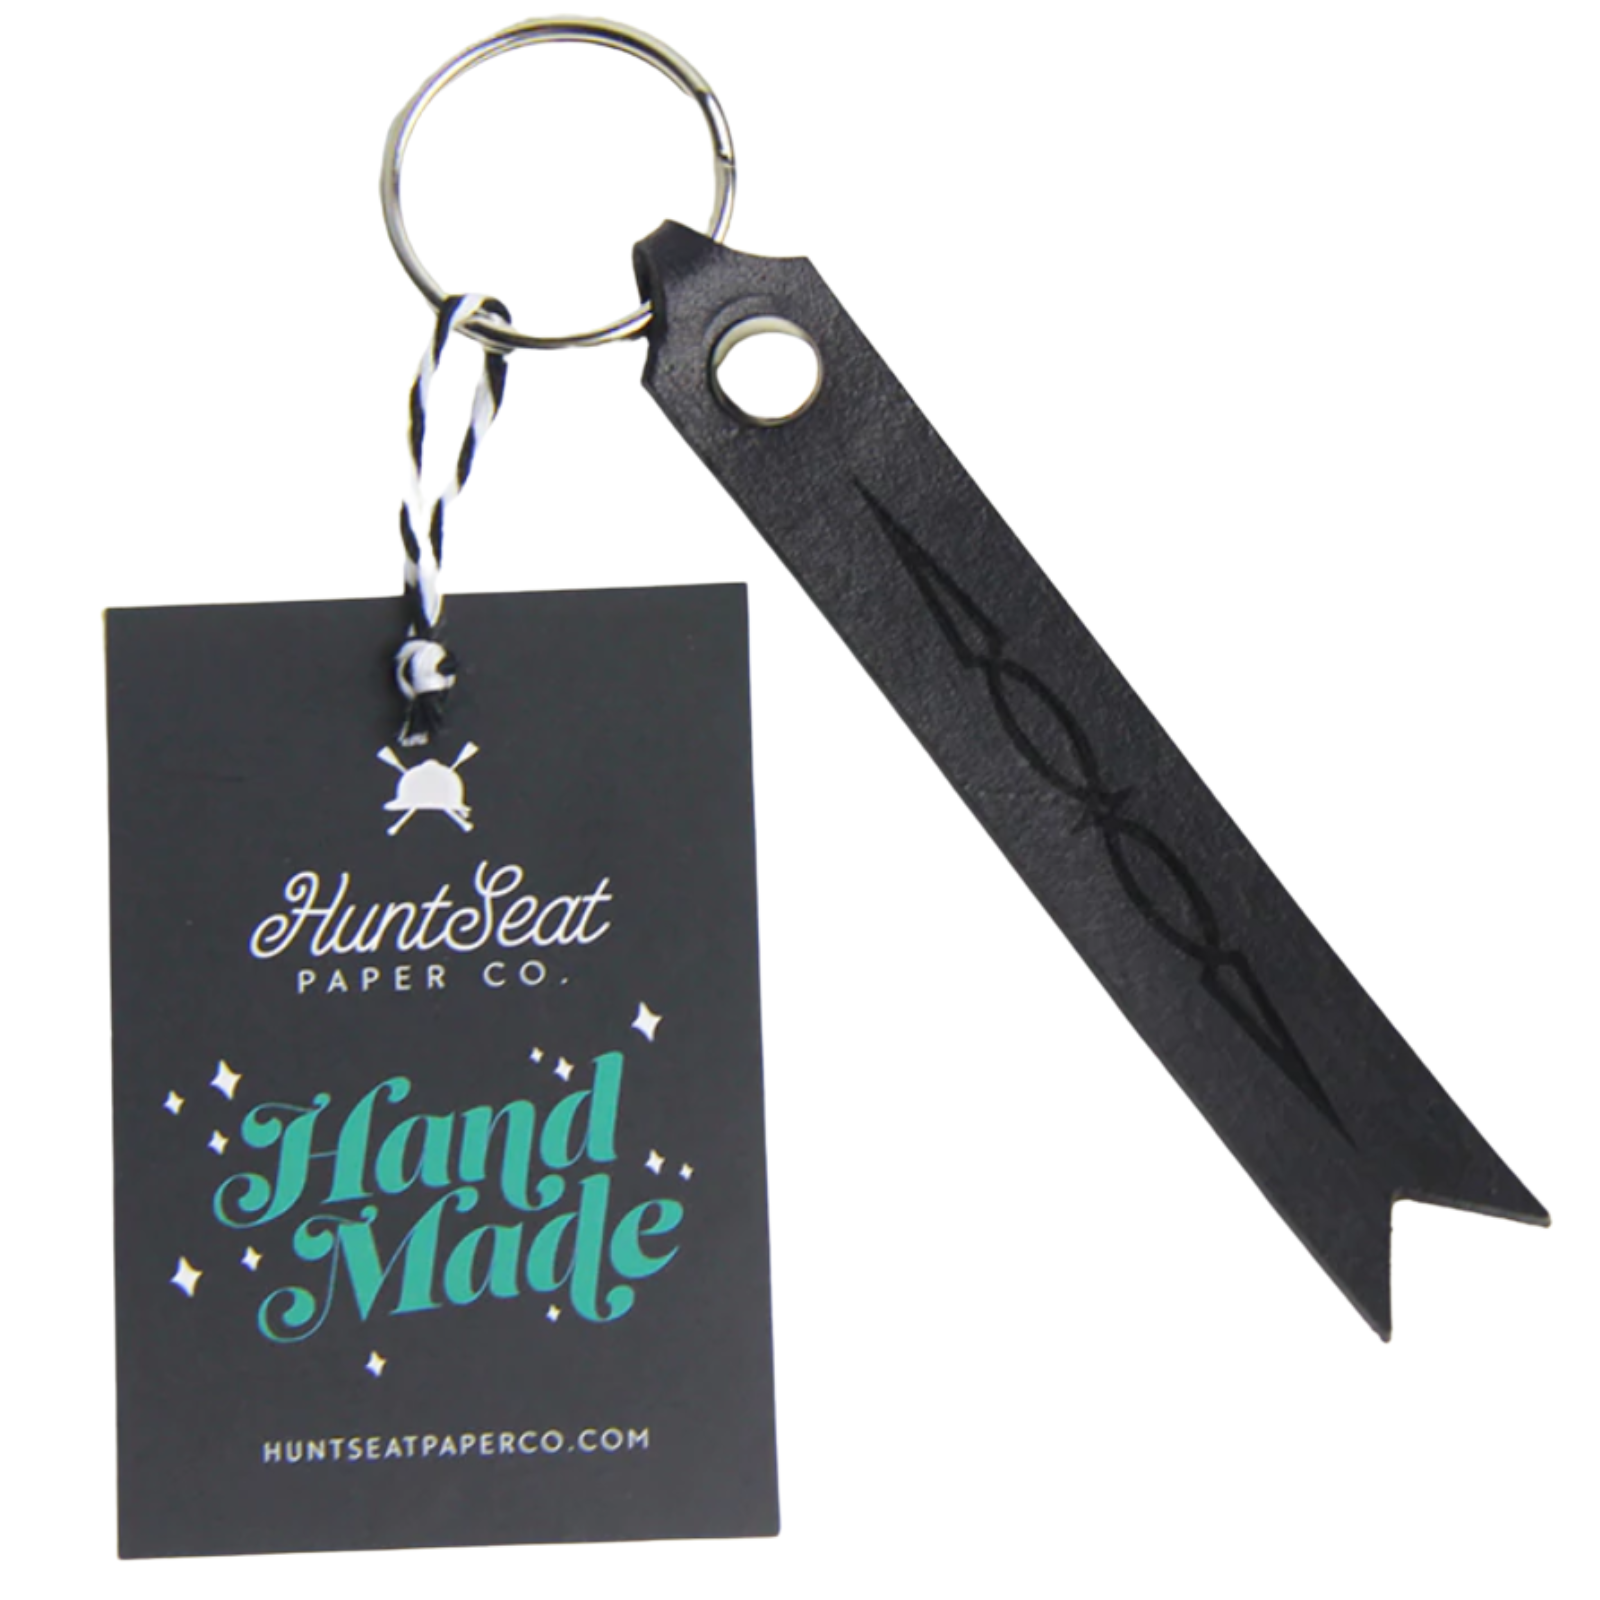 Hunt Seat Paper Co. 'Tacked Up' Keychain in Black